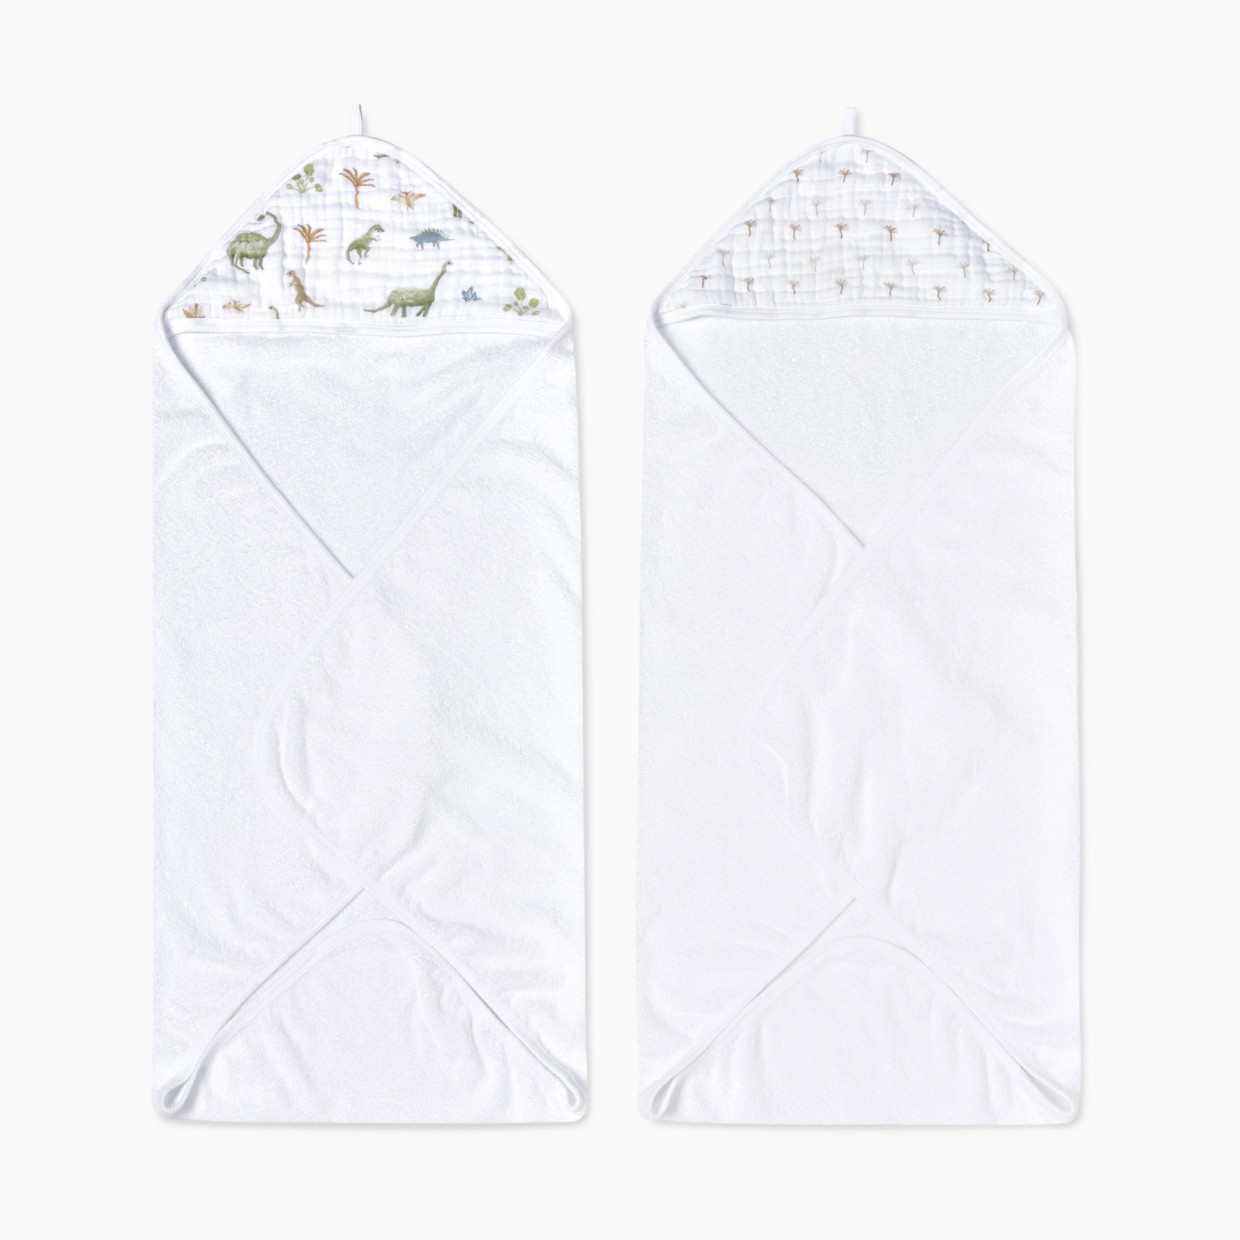 Aden + Anais Essentials Hooded Towels (2 Pack) - Dino Jungle.